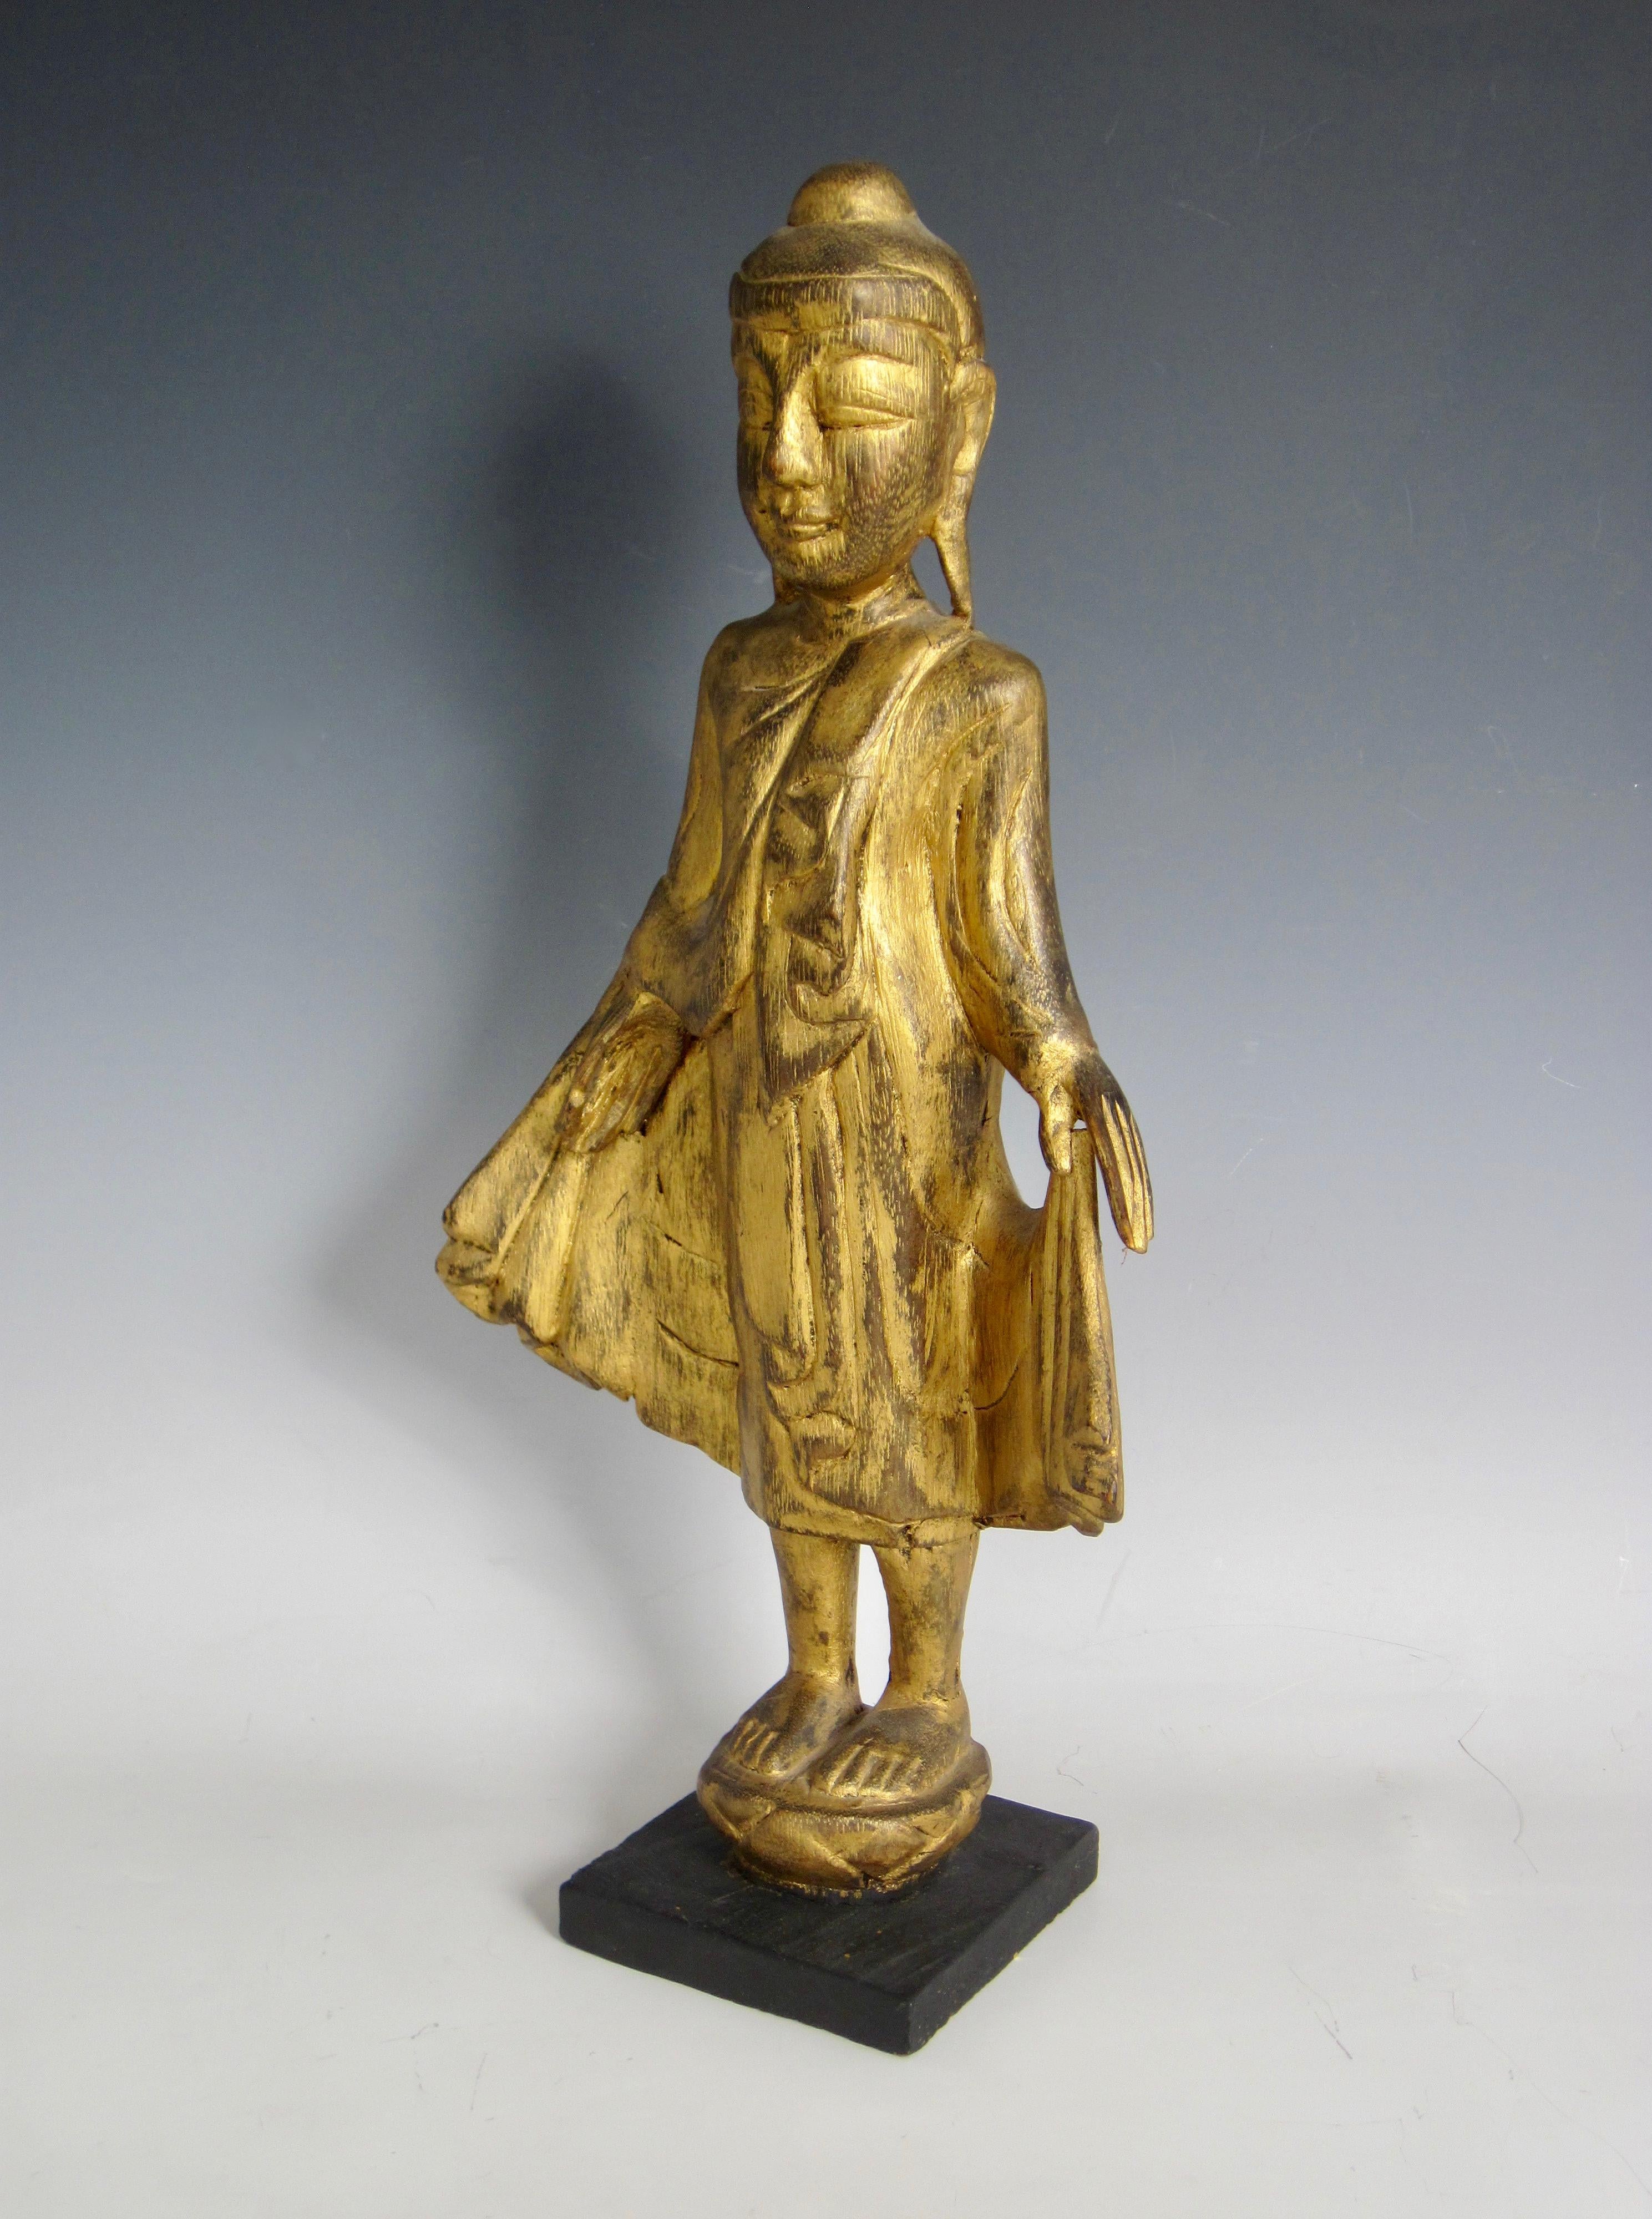 A decorative hand carved Thai giltwood standing Buddha on a lotus flower with black square base. The costume is layered and flowing and the facial expression is peaceful with a grin. Serenity and openness to life is the feeling I get with standing